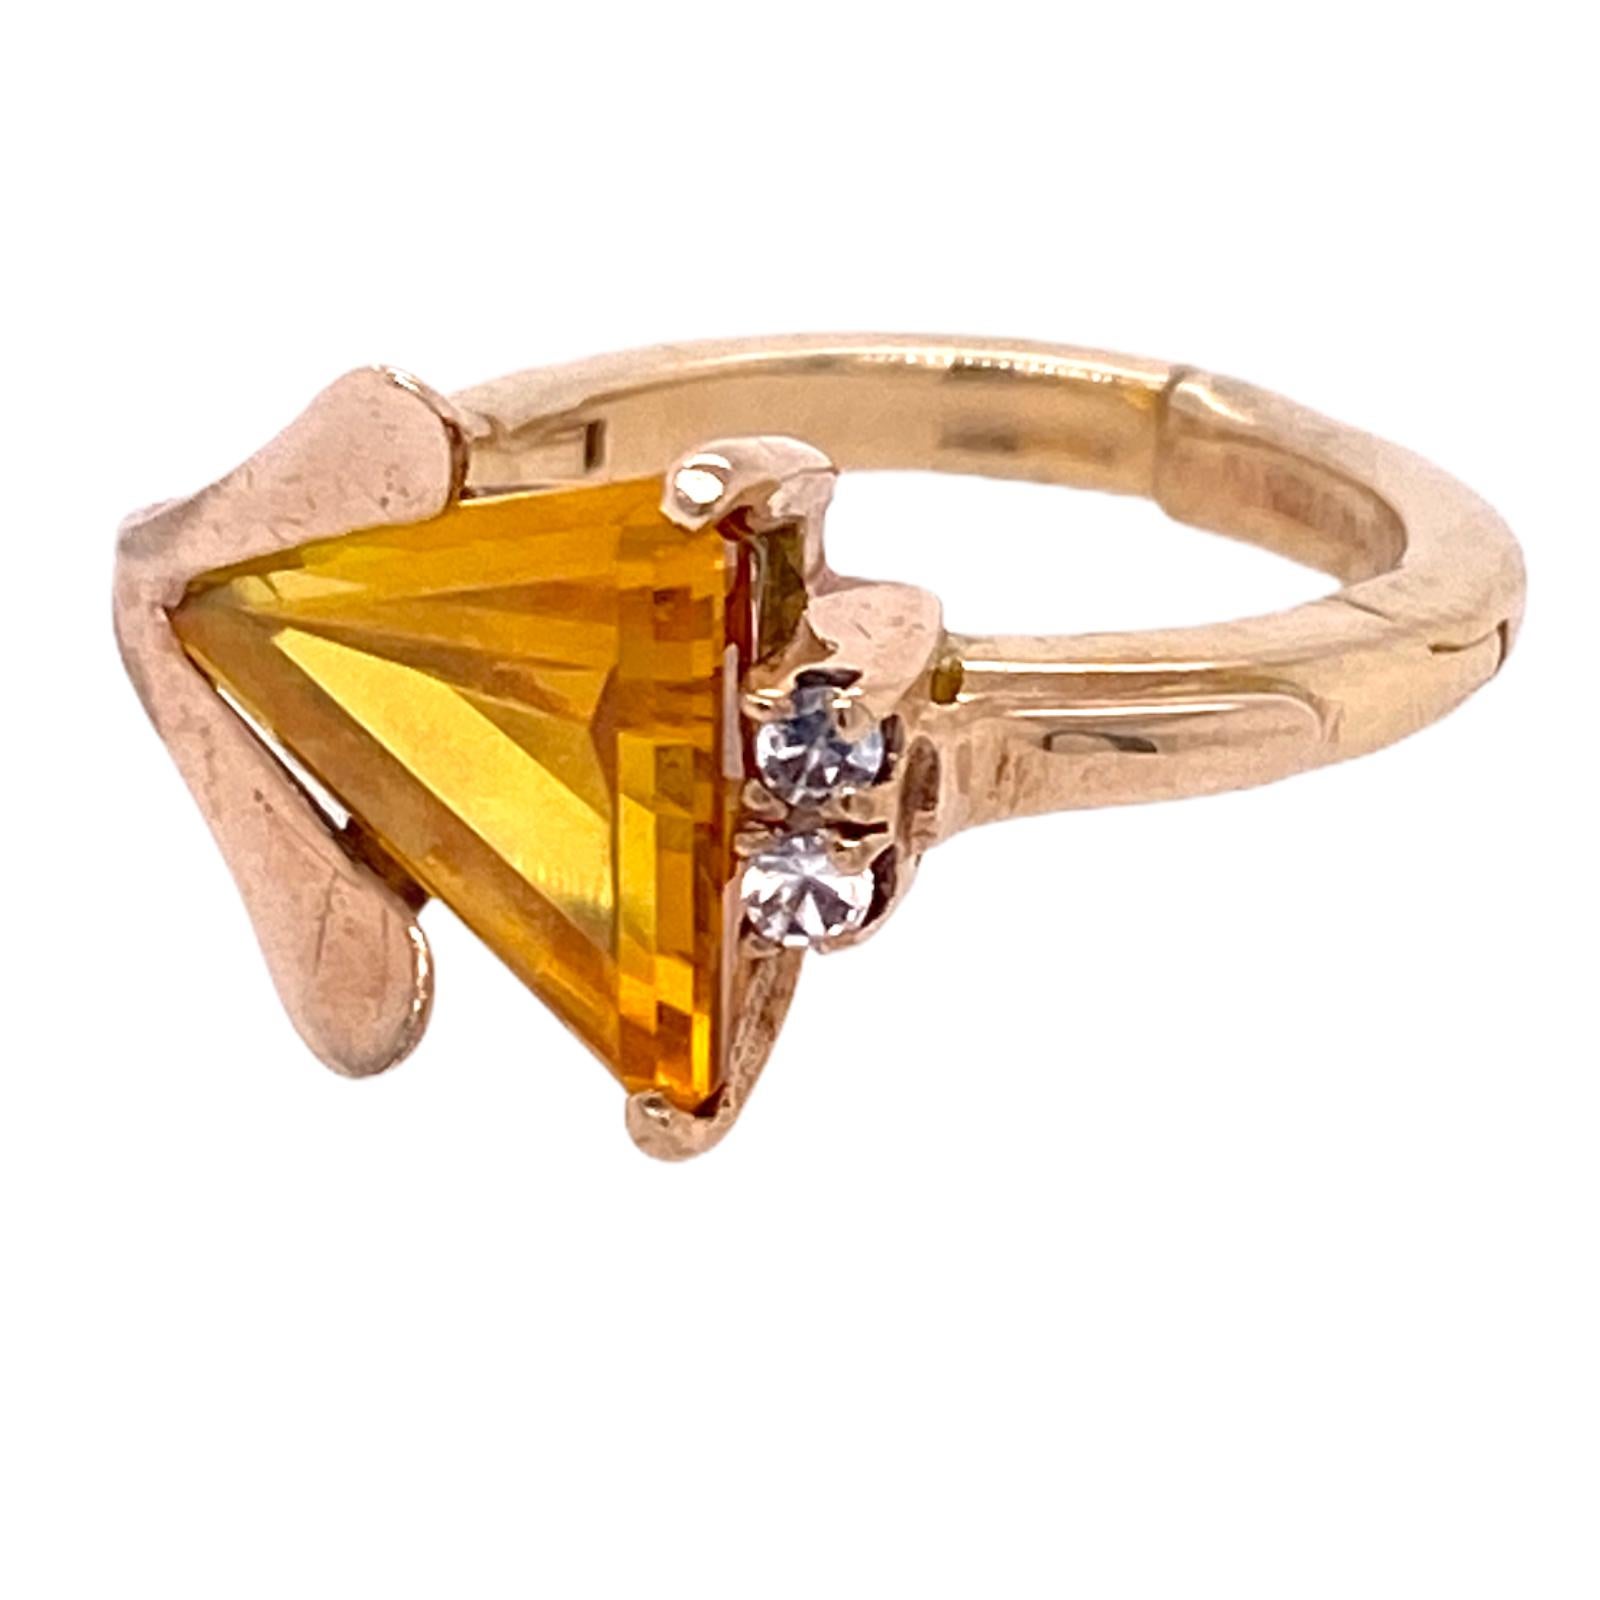 Retro citrine diamond ring fashioned in 14k yellow gold. The triangular cut citrine gemstone is set east to west and features 2 single cut diamonds weighing .16 carat total weight. The ring measures 11.5 mm in width and is currently size 5. A